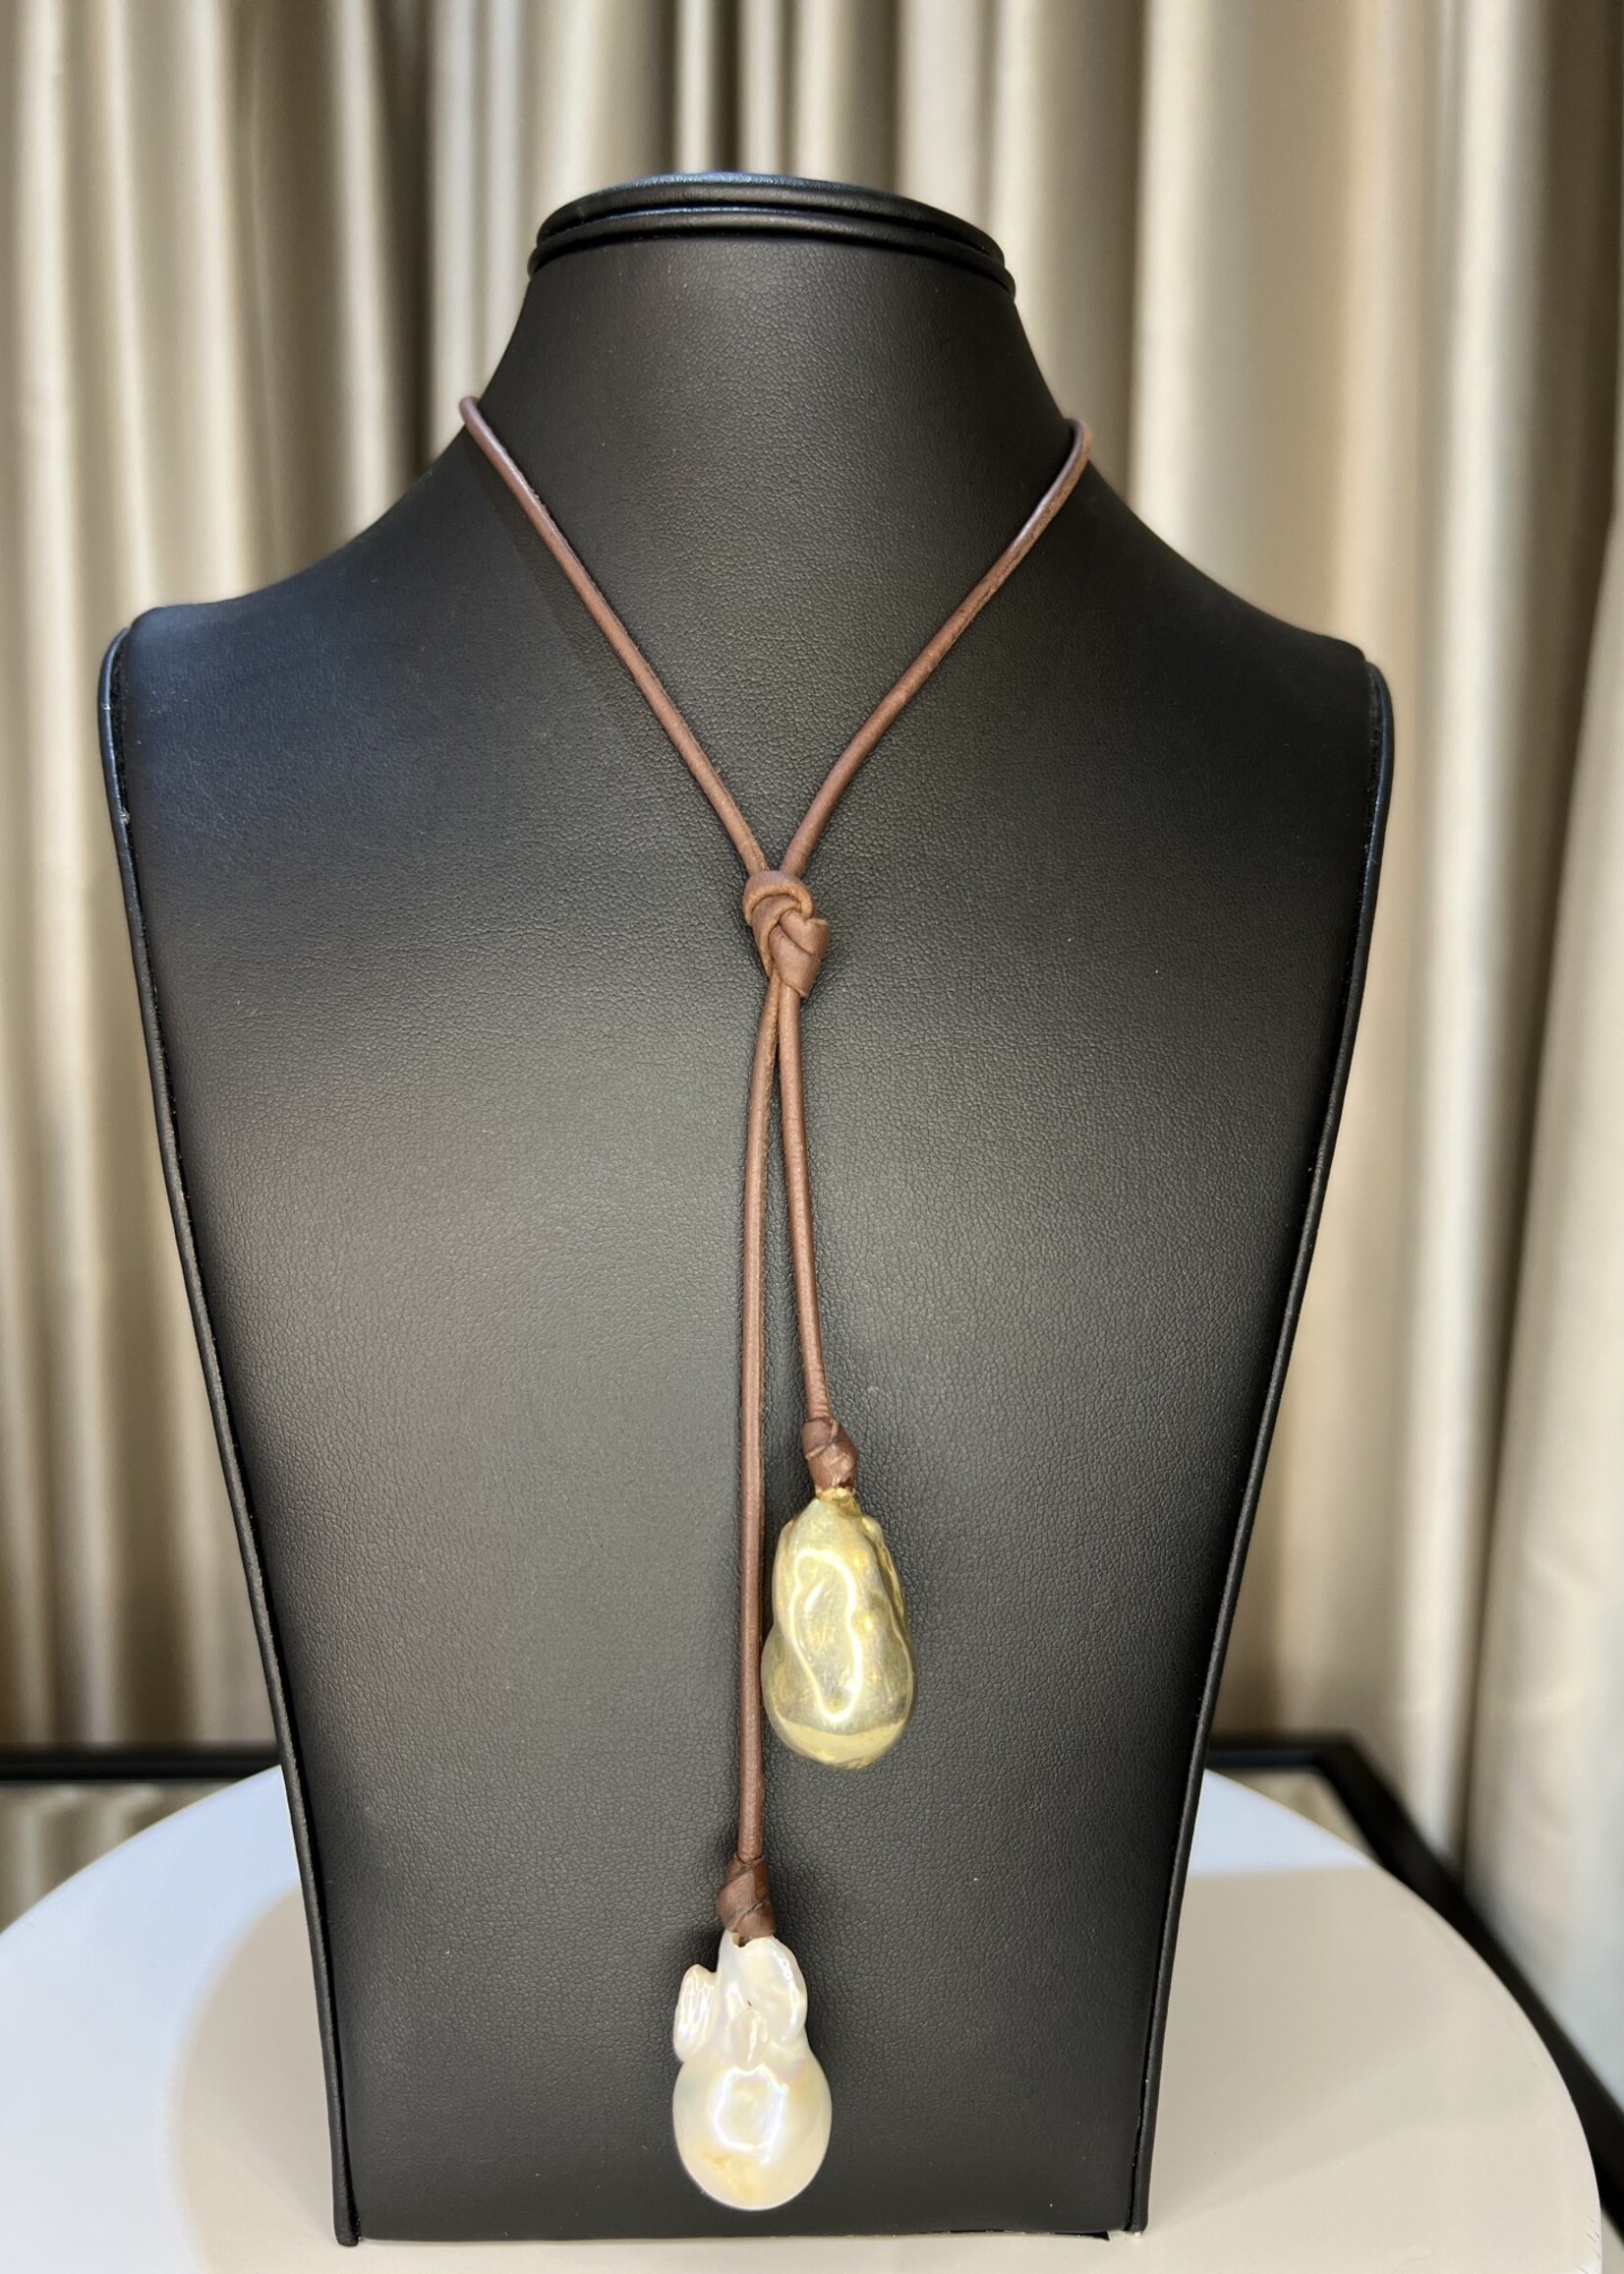 Mina Danielle Large white Baroque Pearl with Gold Bead hang from each end of chocolate brown leather cord. Can be worn multiple ways